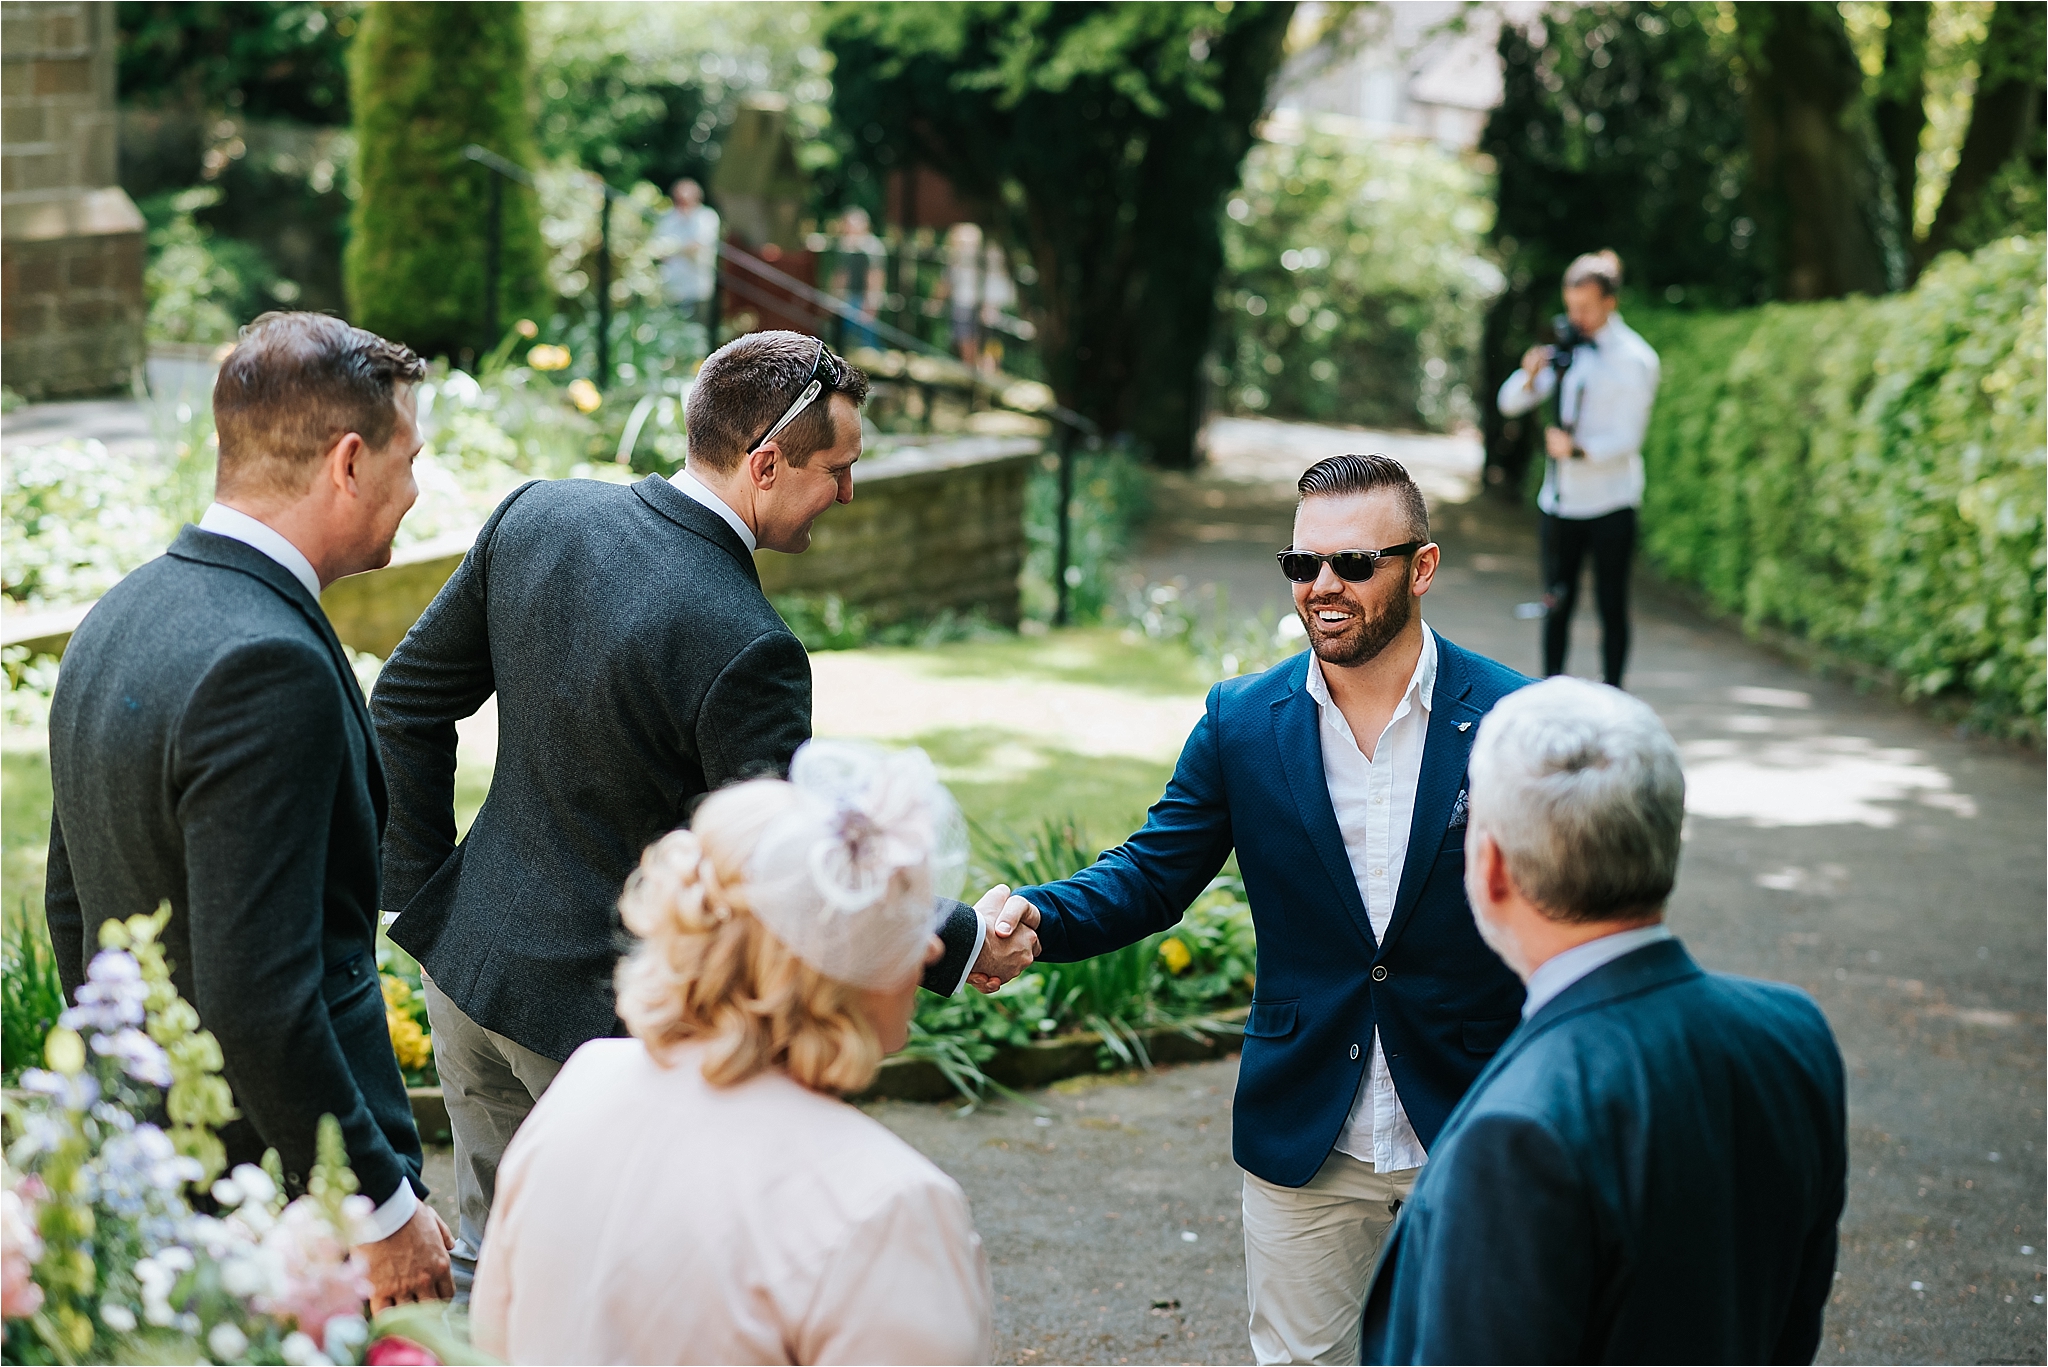 guests arrive at church for wedding 